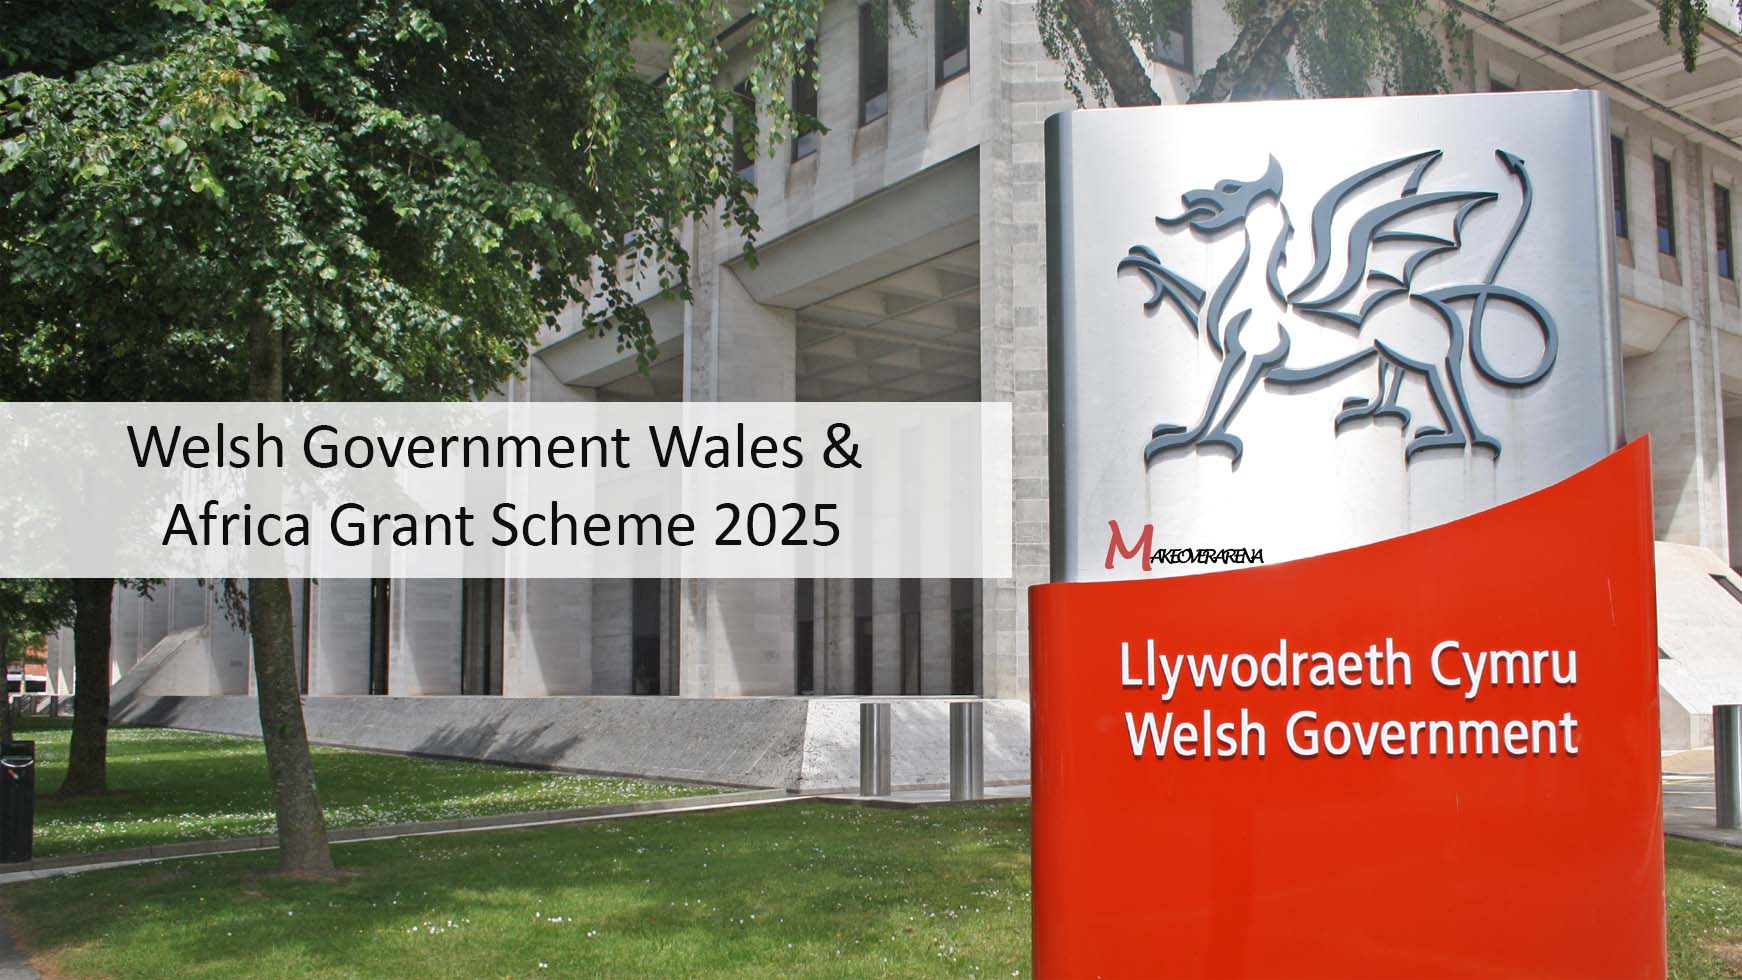 Welsh Government Wales & Africa Grant Scheme 2025